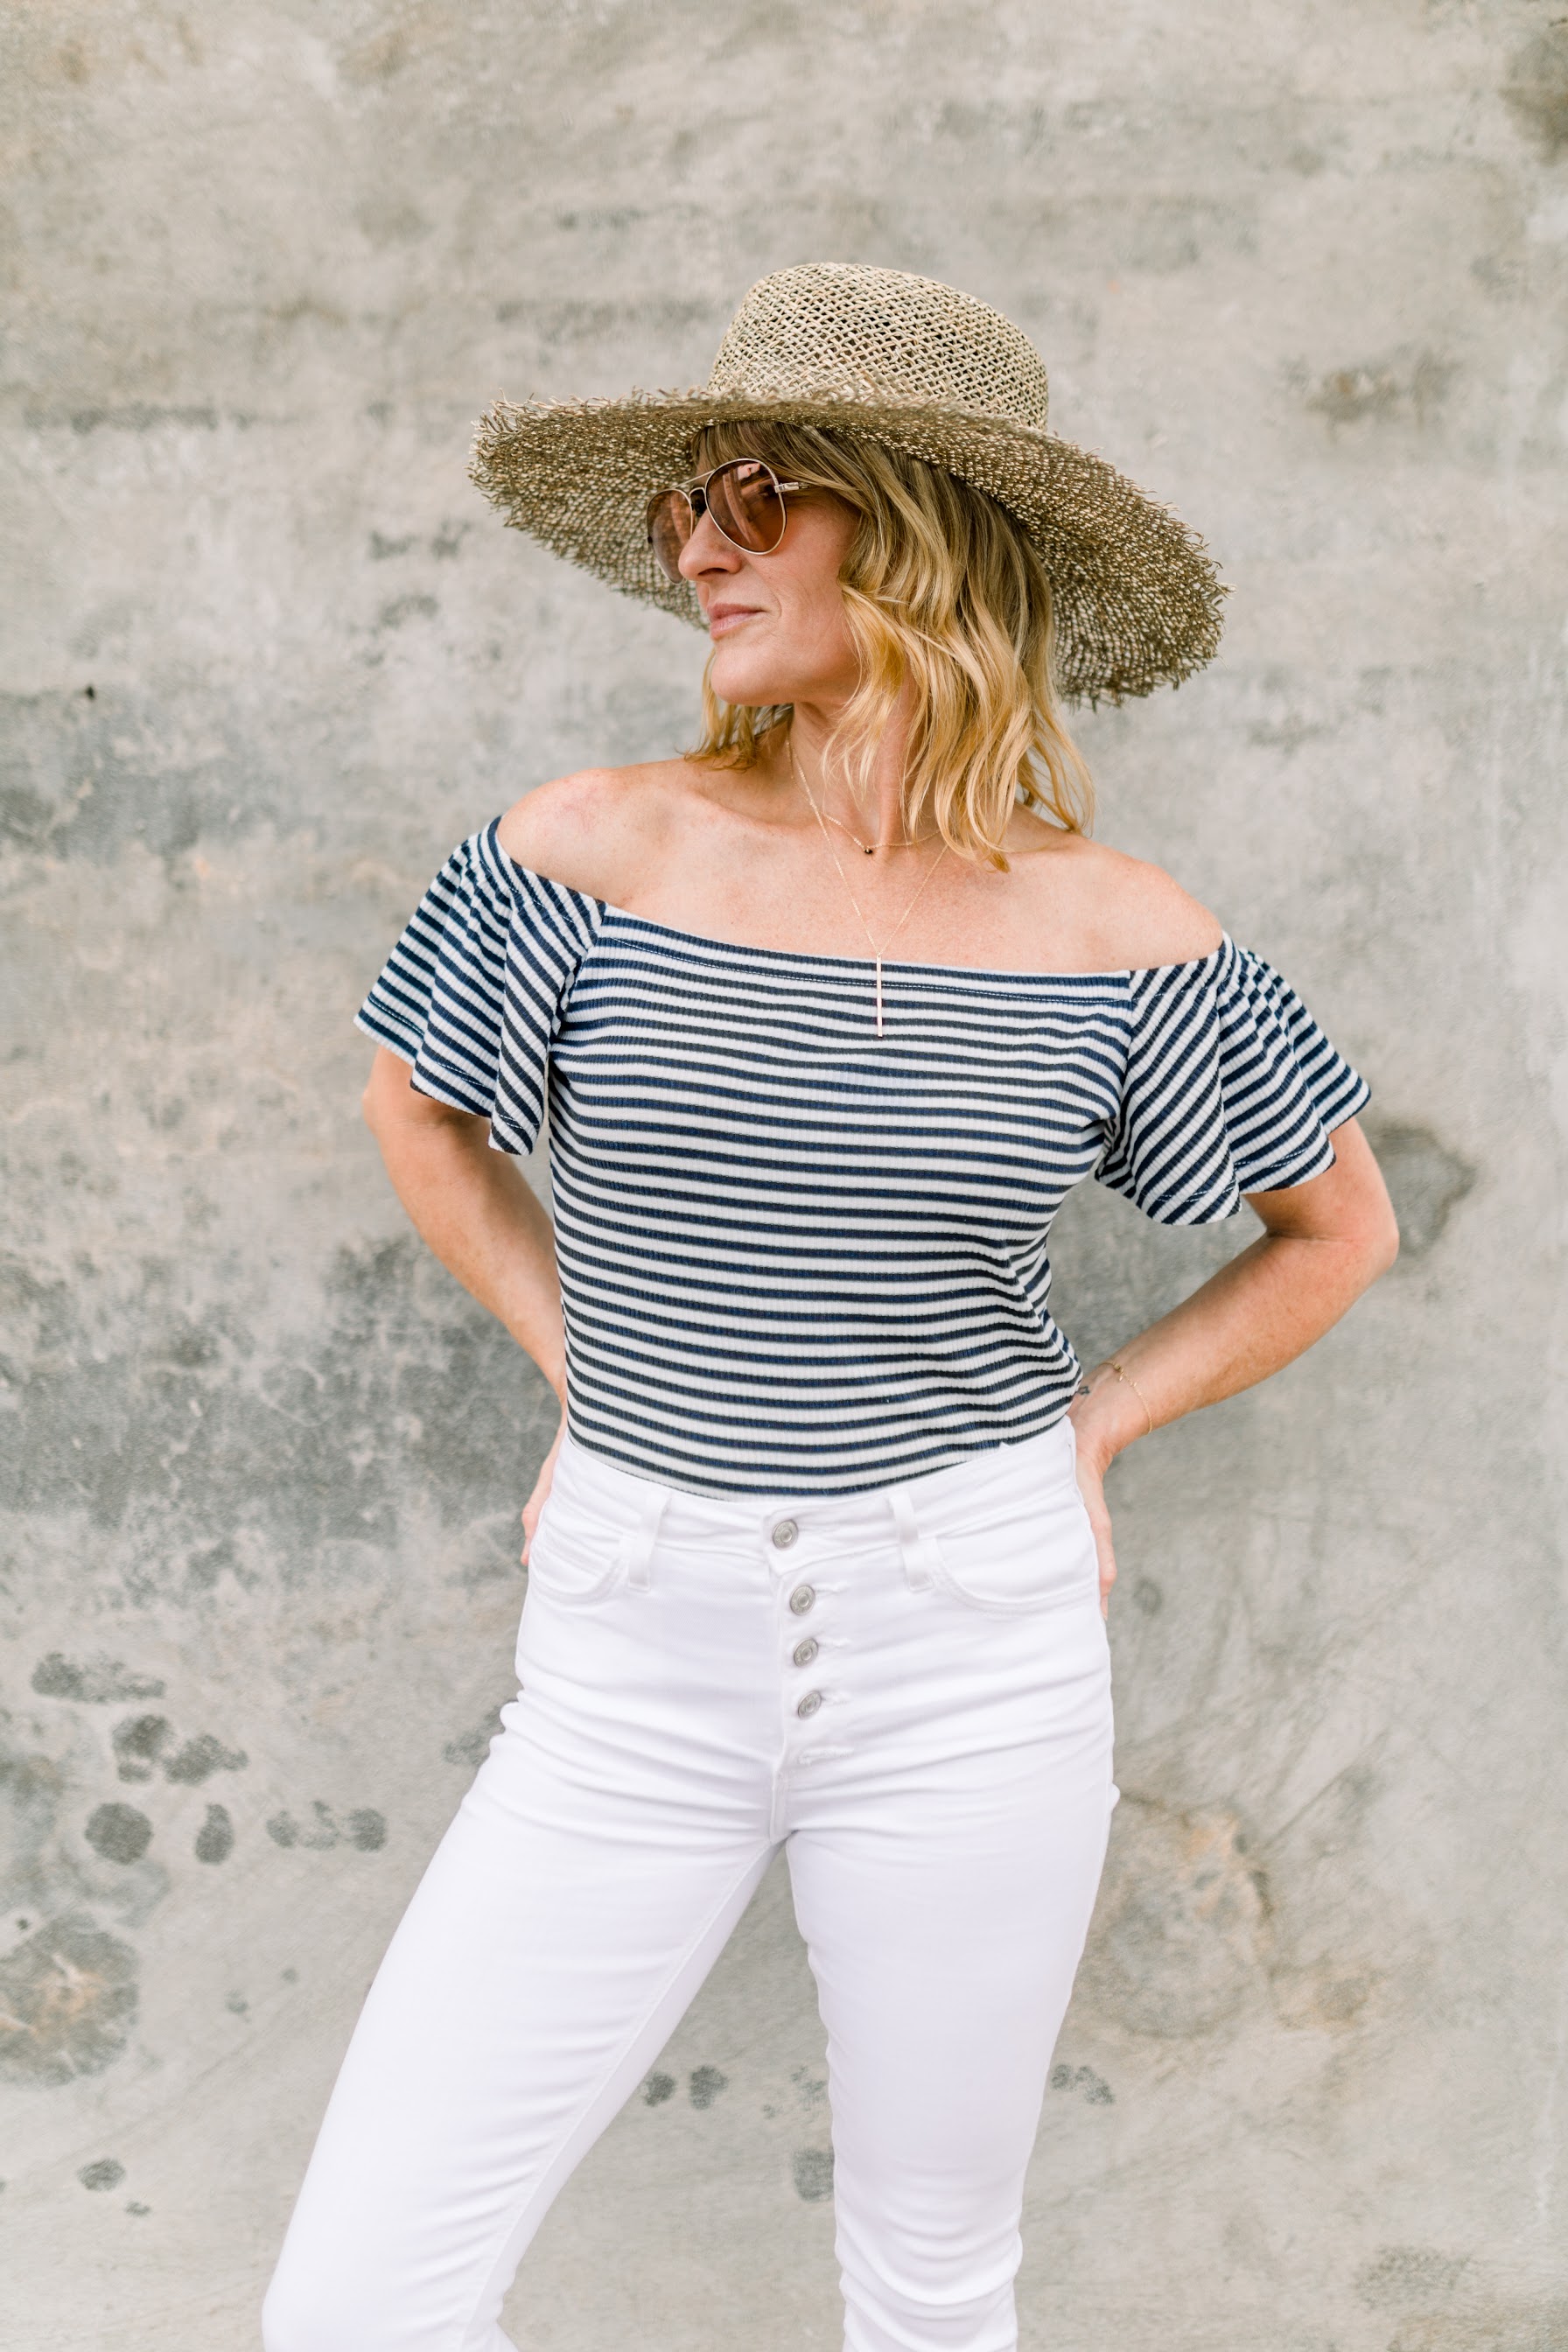 How to Wear White Jeans 3 Ways | how to wear white jeans outfit | how to wear white jeans outfit summer | white jeans outfit | white jeans outfit summer | off the shoulder top | off the shoulder top outfit | off the shoulder top summer | striped off the shoulder outfit | Oh Darling Blog